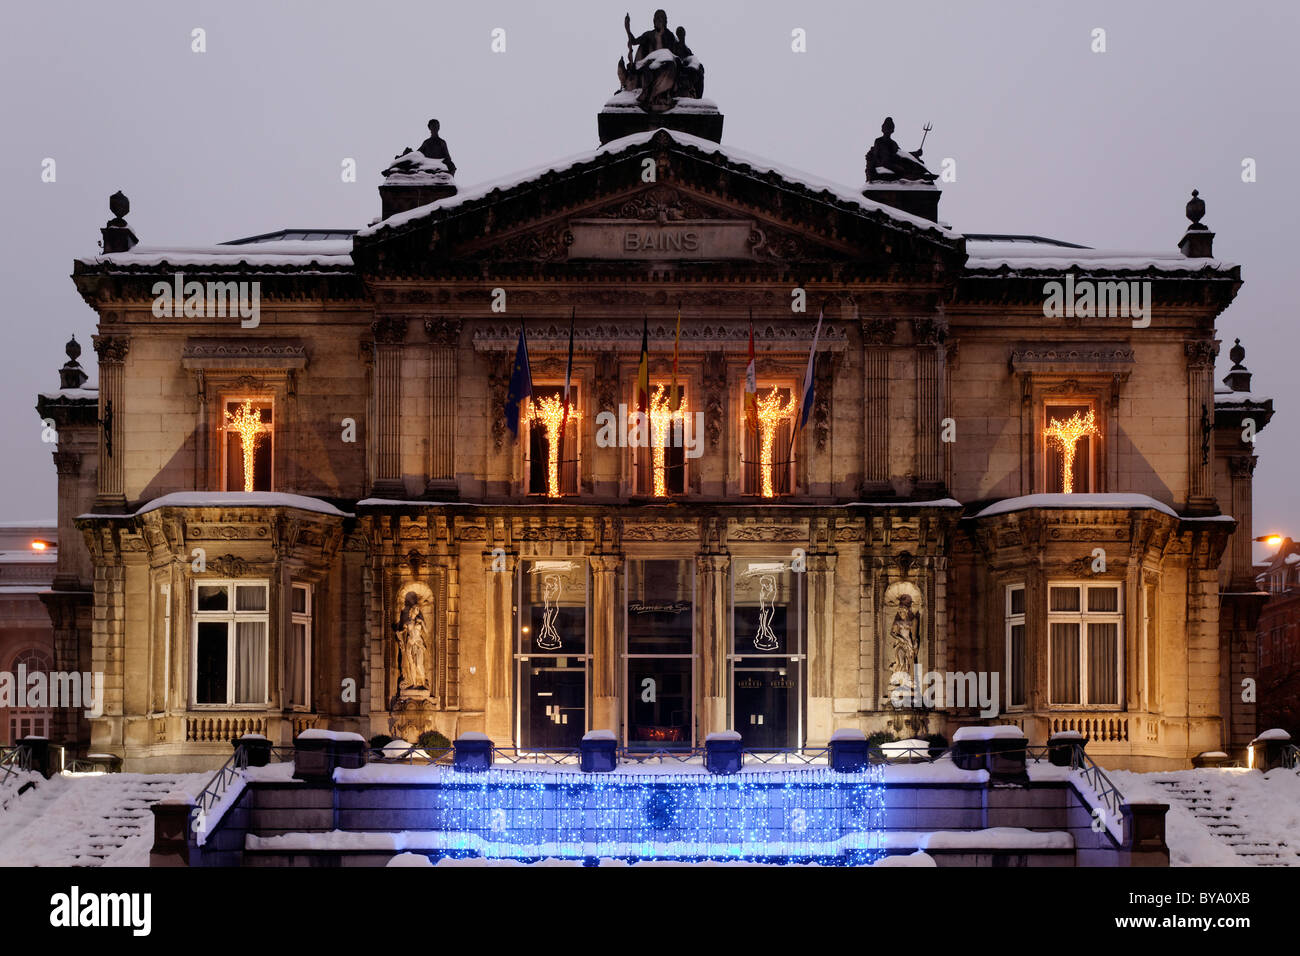 Bains, a historic spa building on Place Royal square, health spa, Ardennes region, Liège province, Wallonia region, Belgium Stock Photo